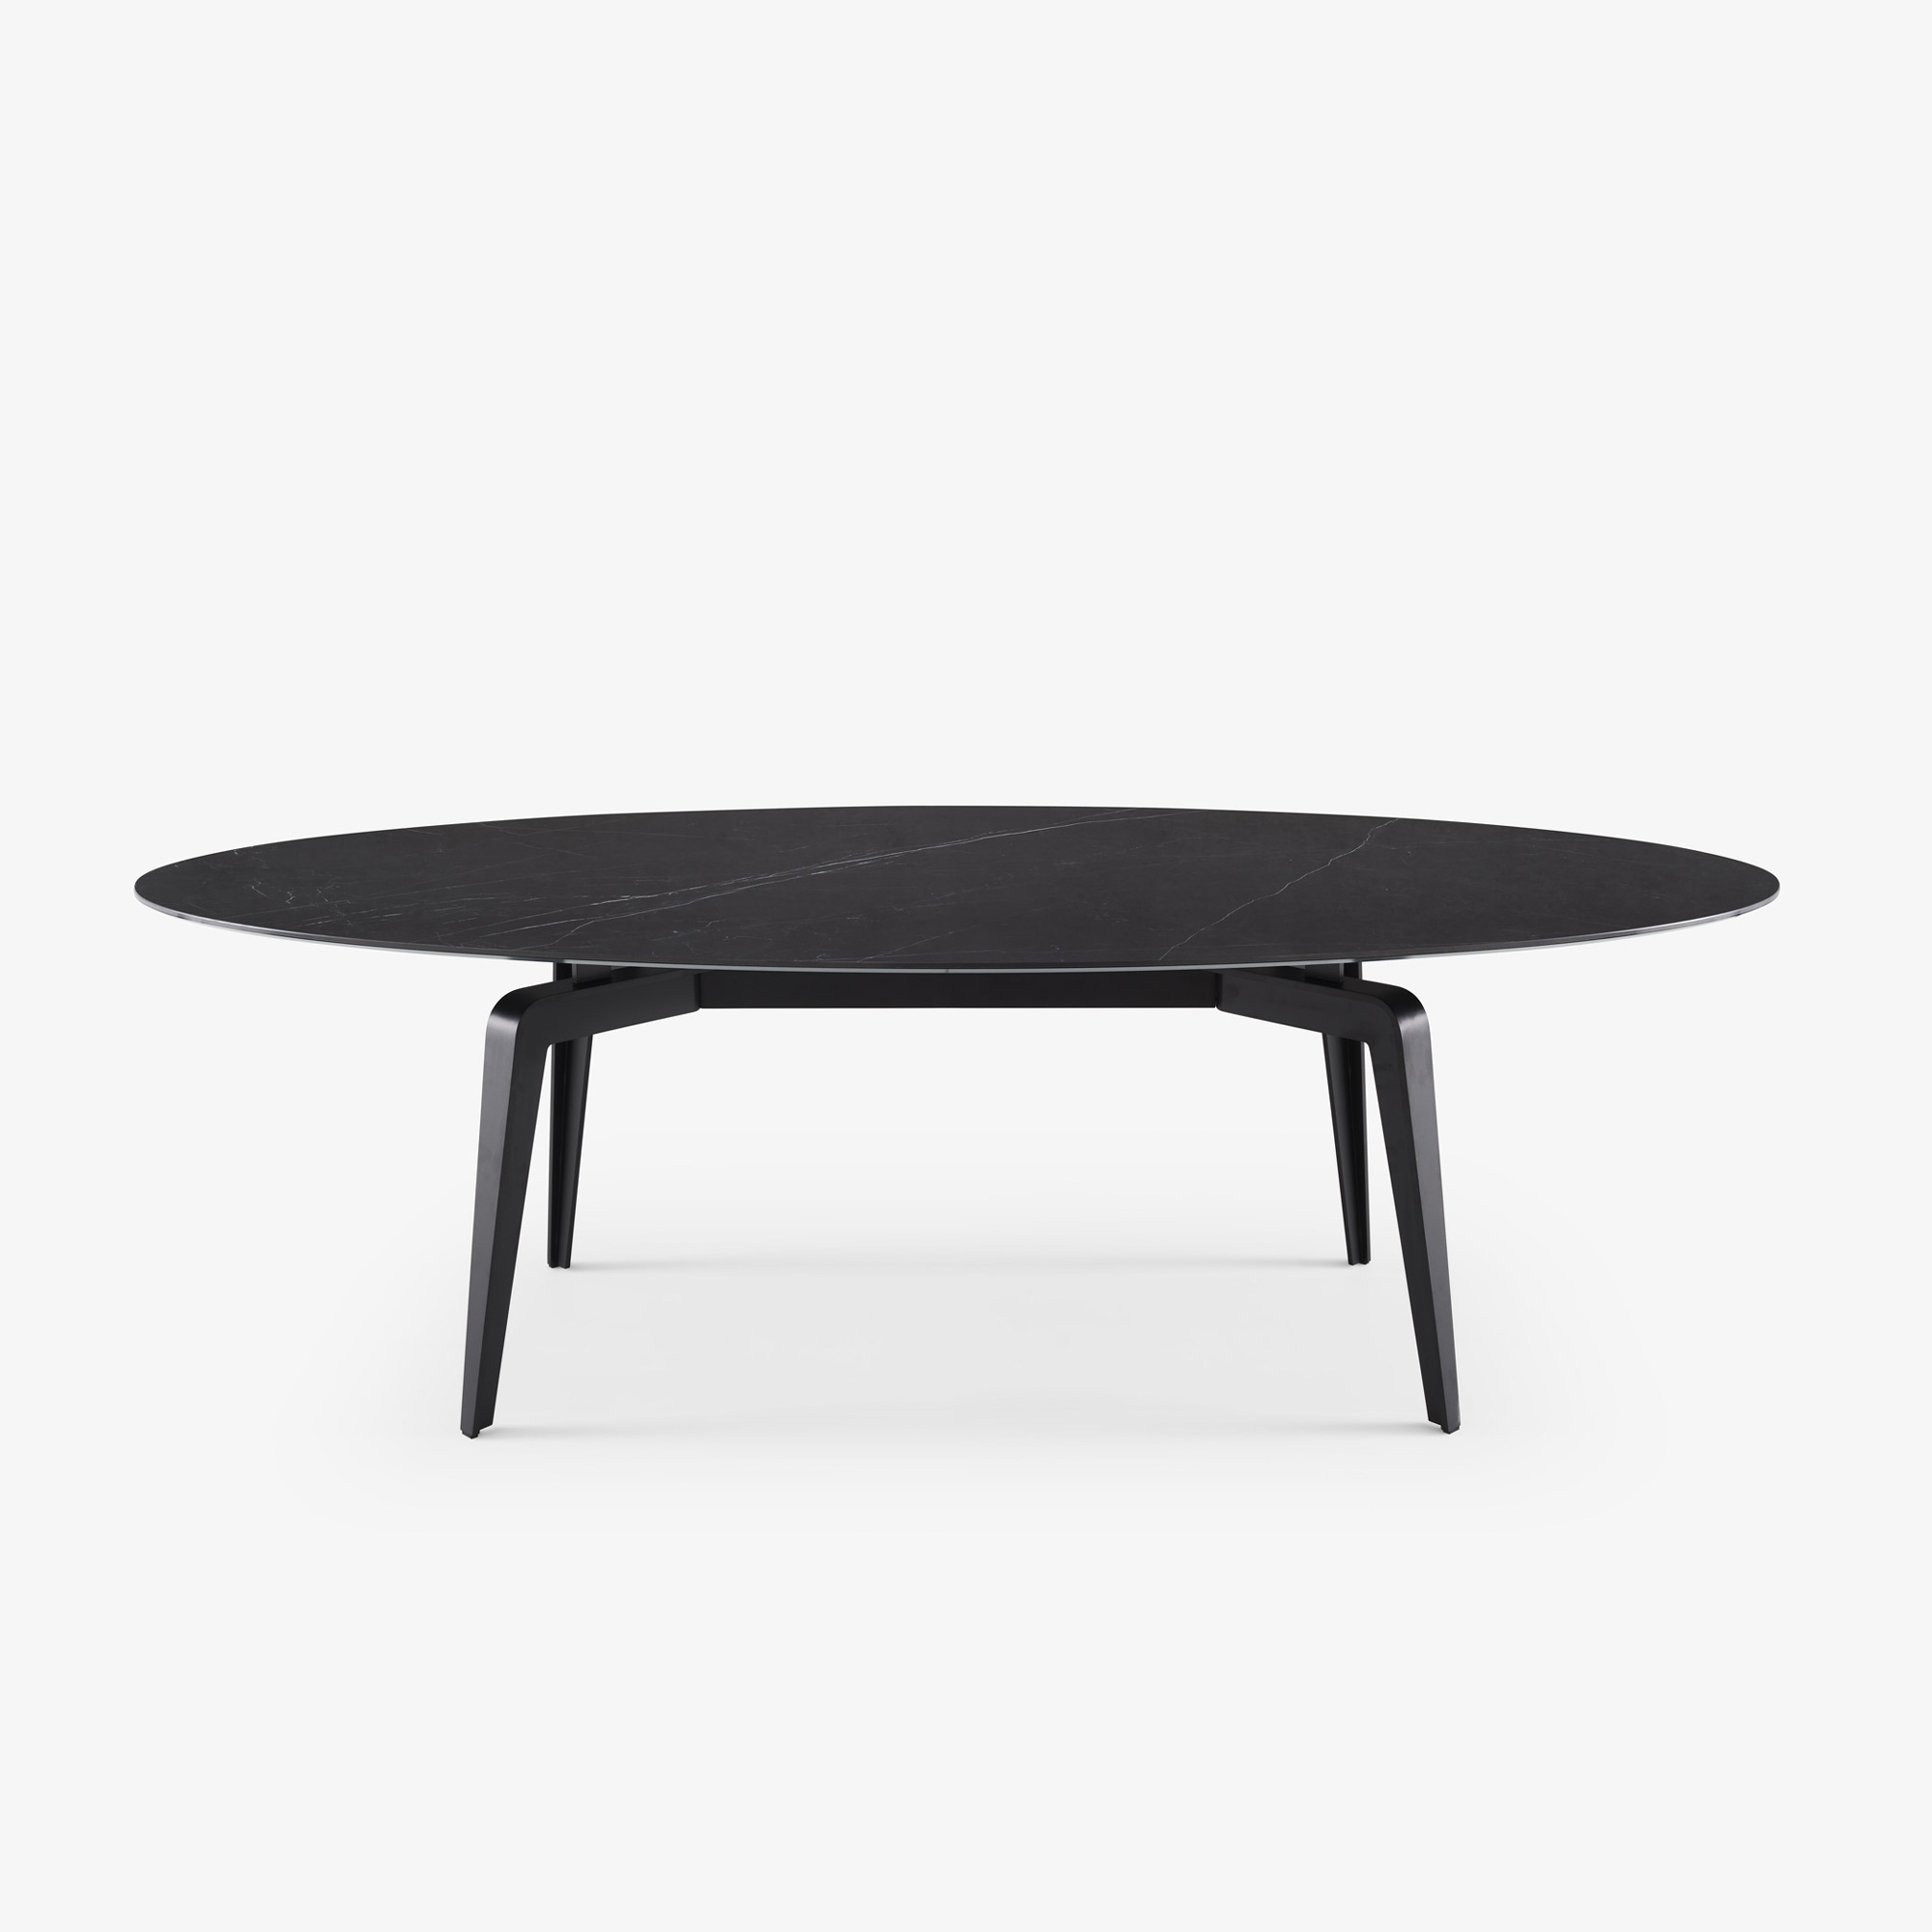 Image OVAL DINING TABLE BLACK LACQUERED BASE 